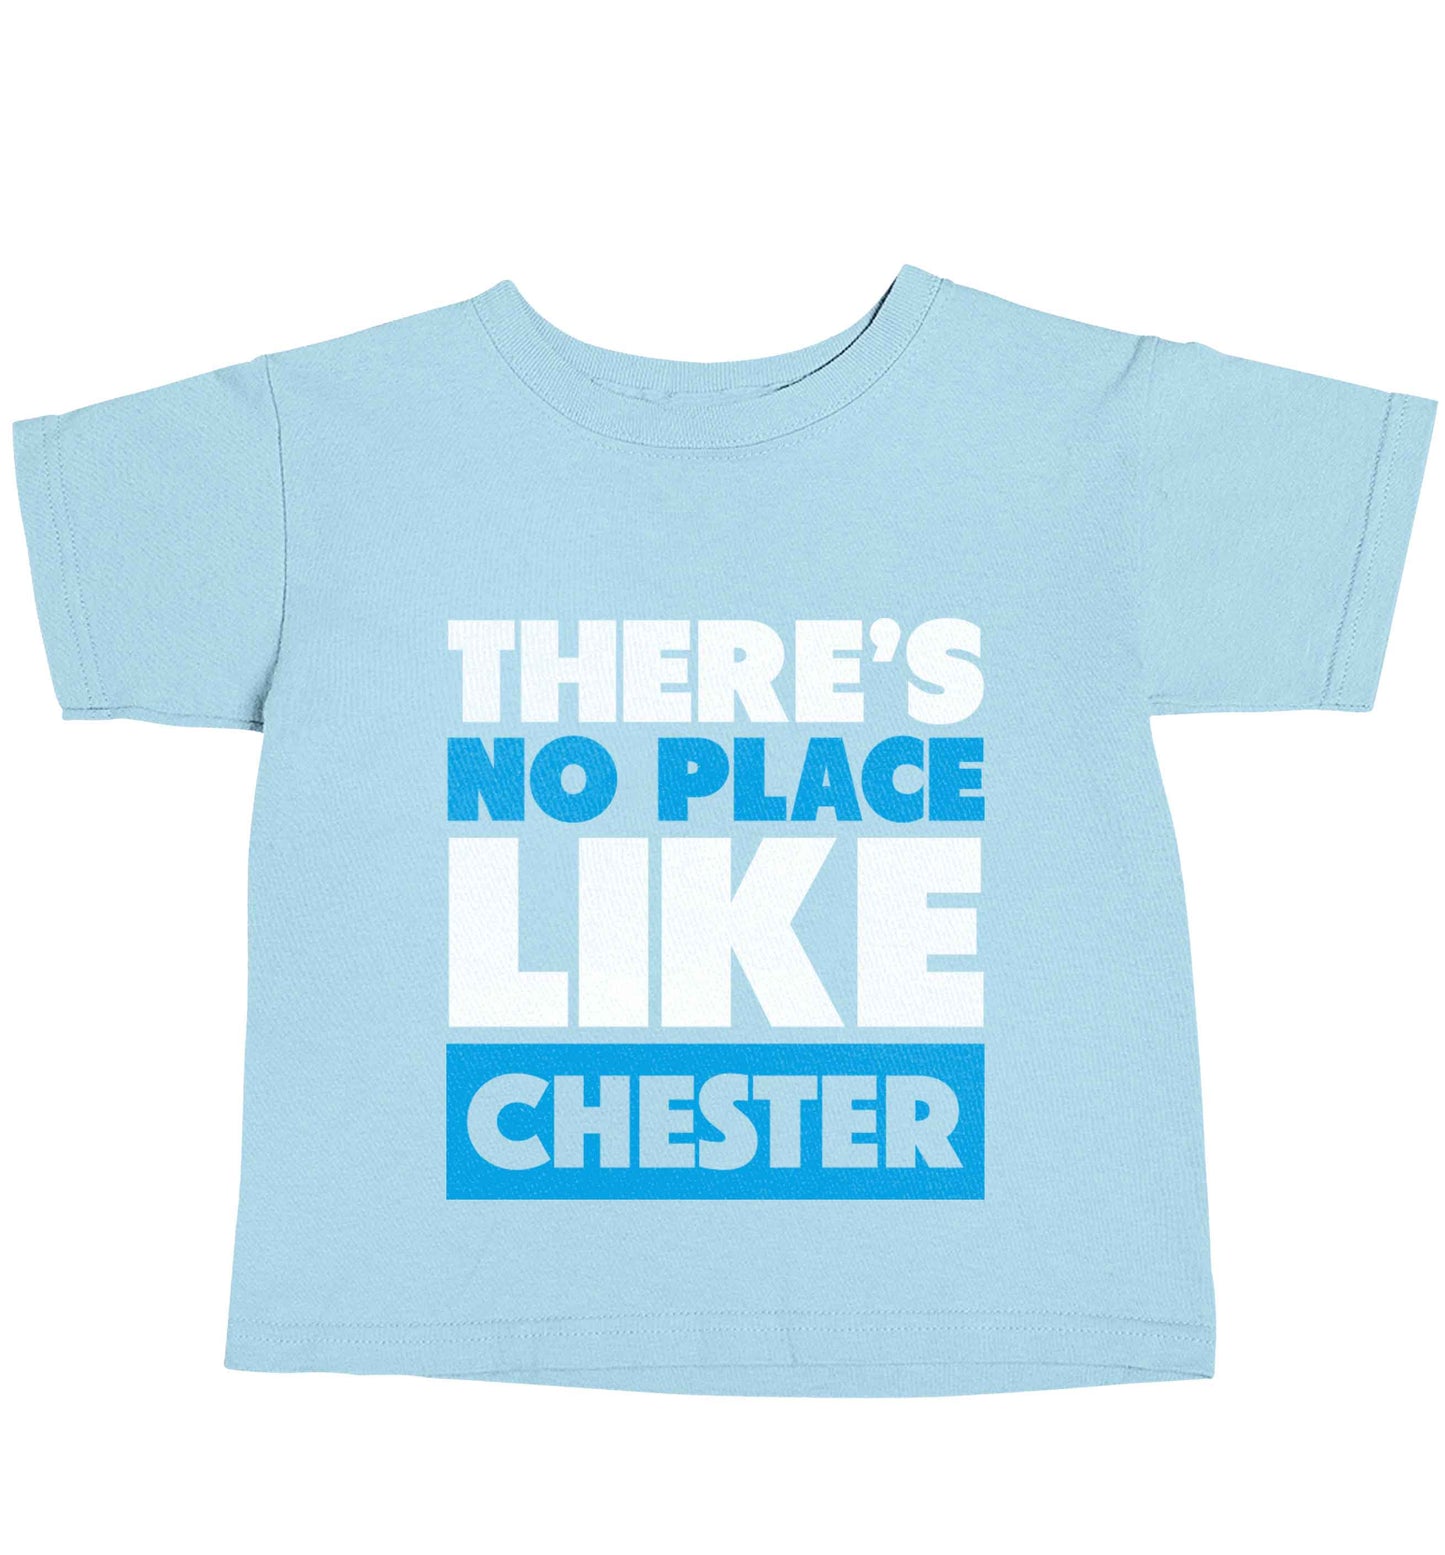 There's no place like Chester light blue baby toddler Tshirt 2 Years